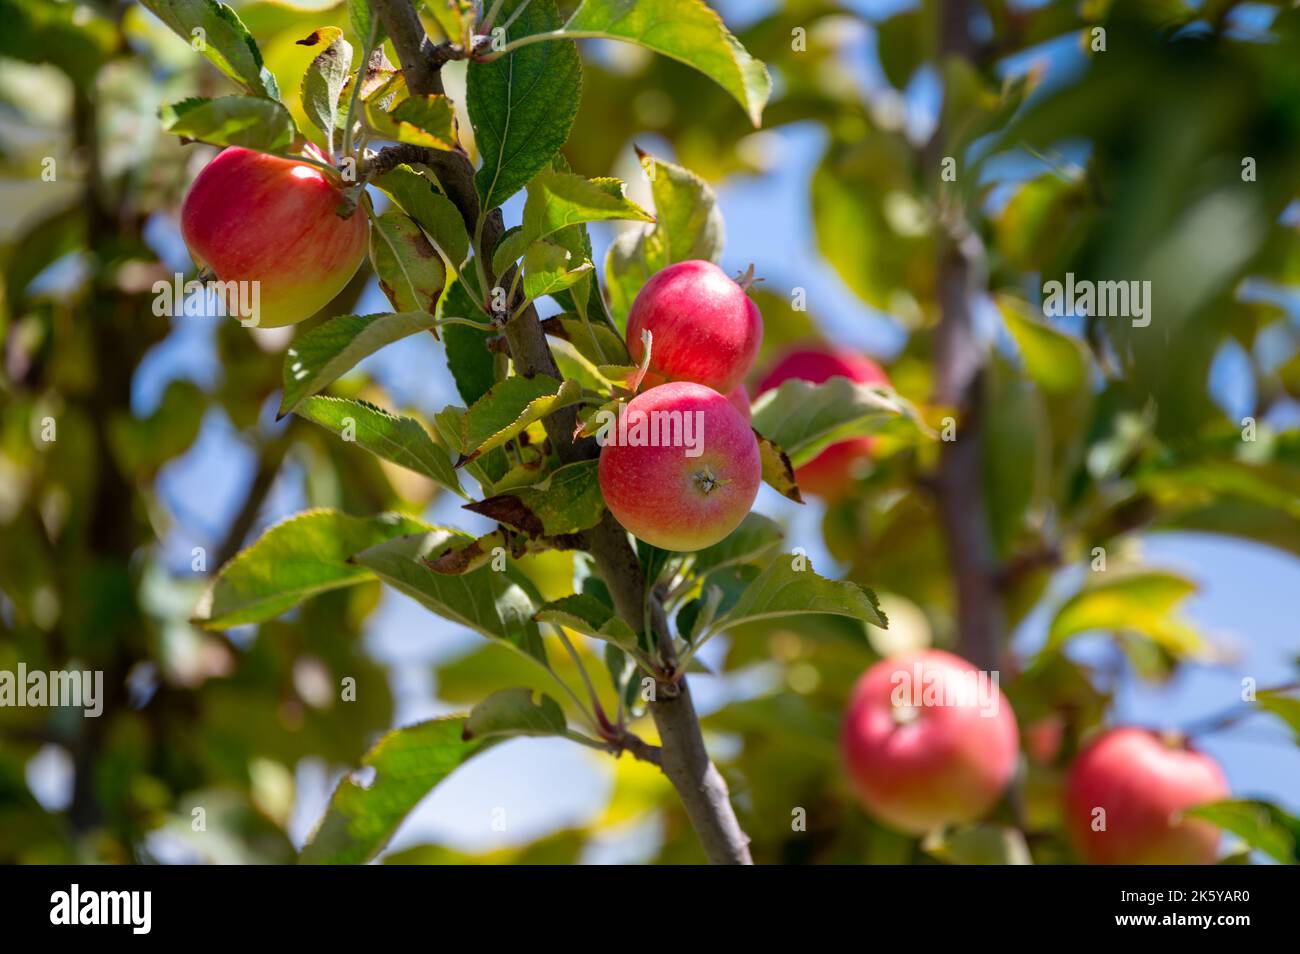 Fruit orchard on Cyprus with apple trees with small red fruits Stock Photo